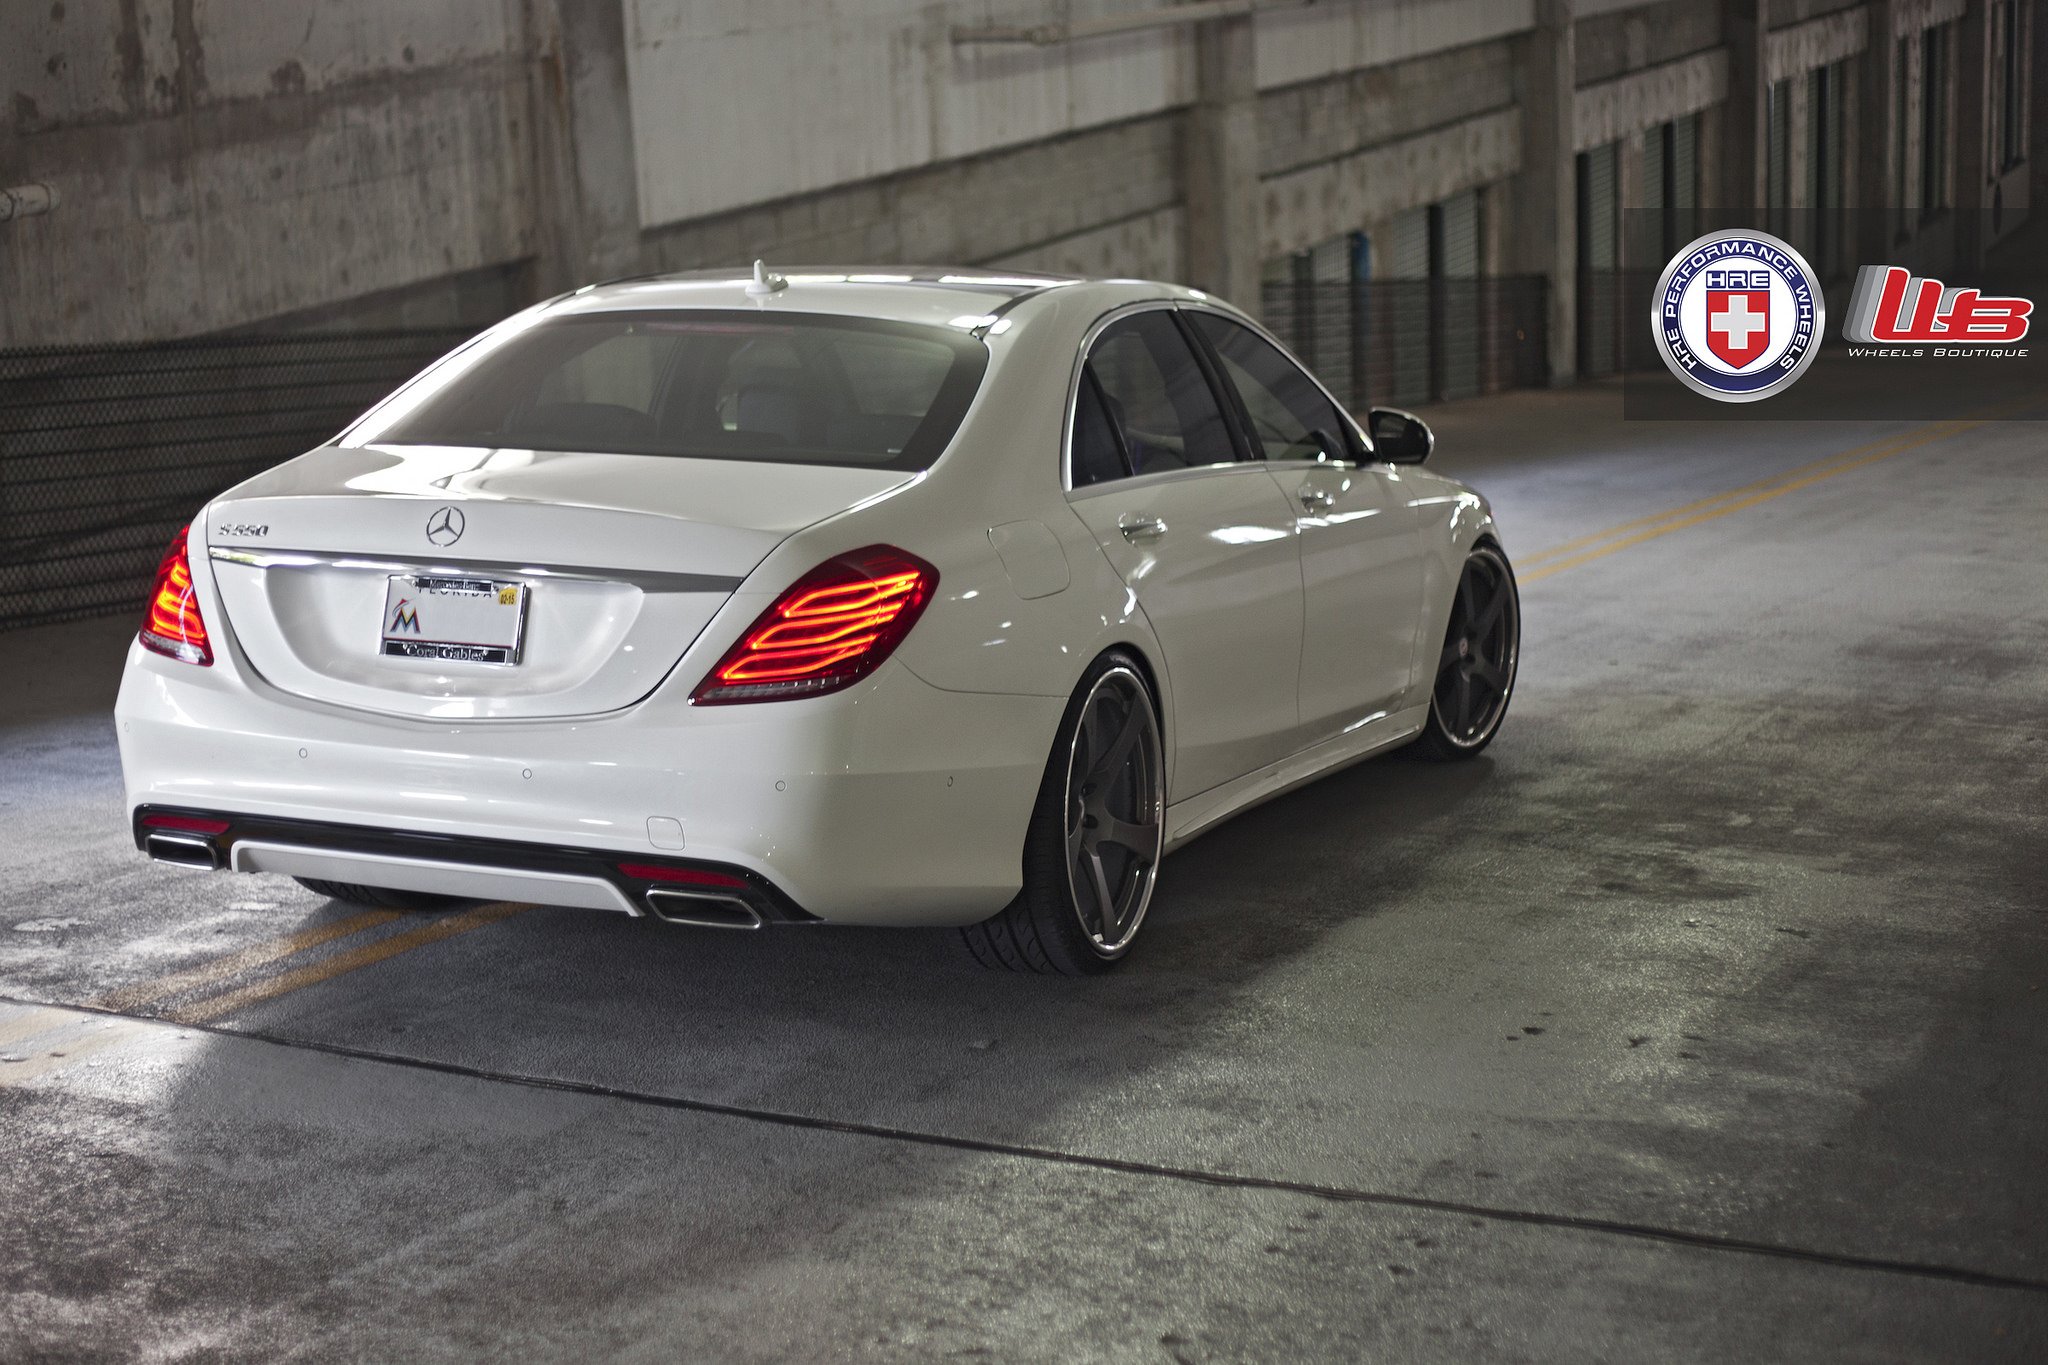 mercedes, S550, Hre, Cars, Tuning, Wheels, Cars Wallpaper